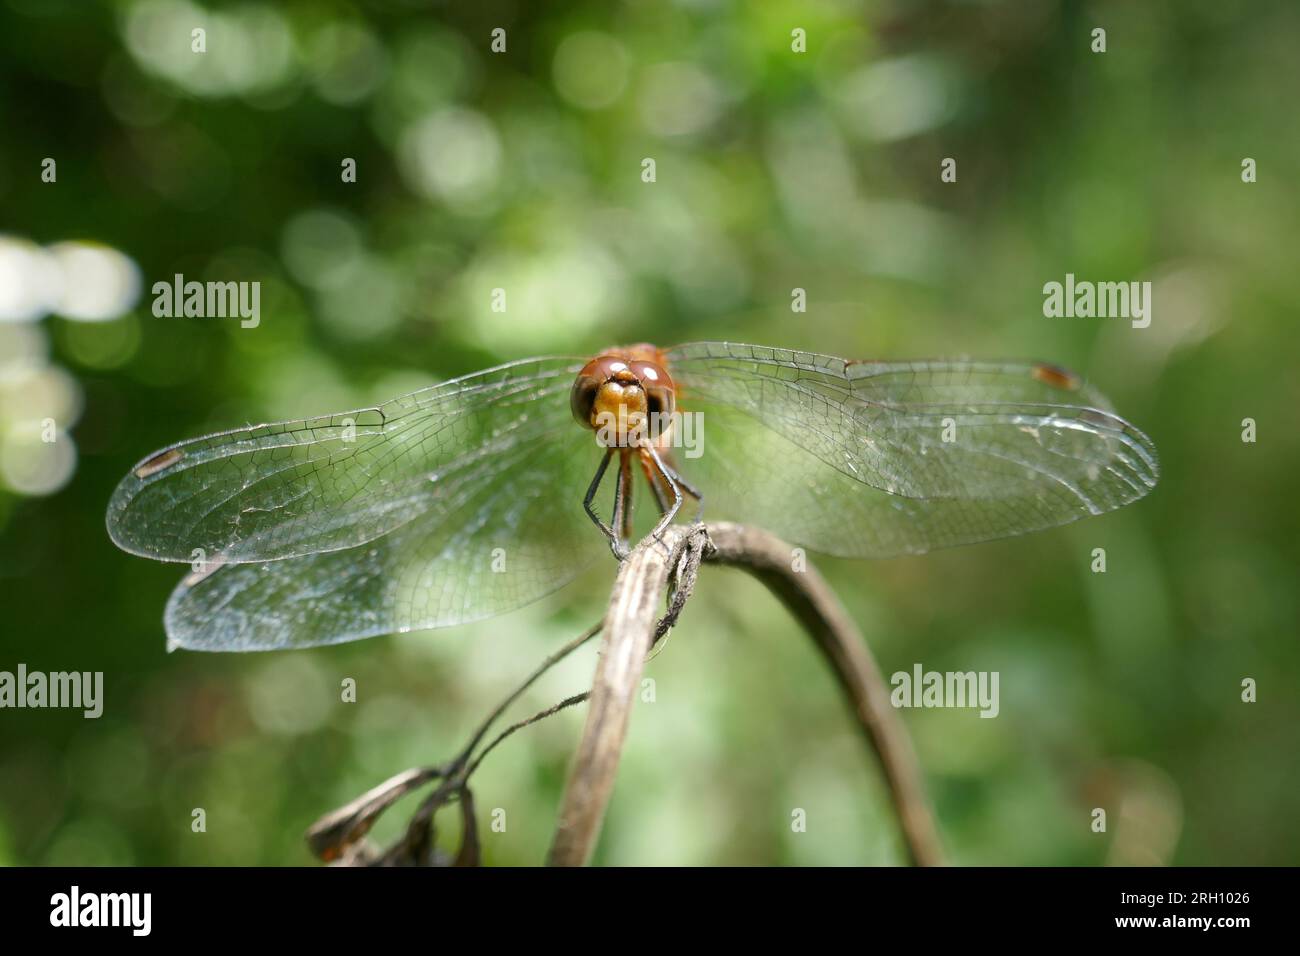 Close-up view of head with compound eyes of dragonfly flying insect Stock Photo